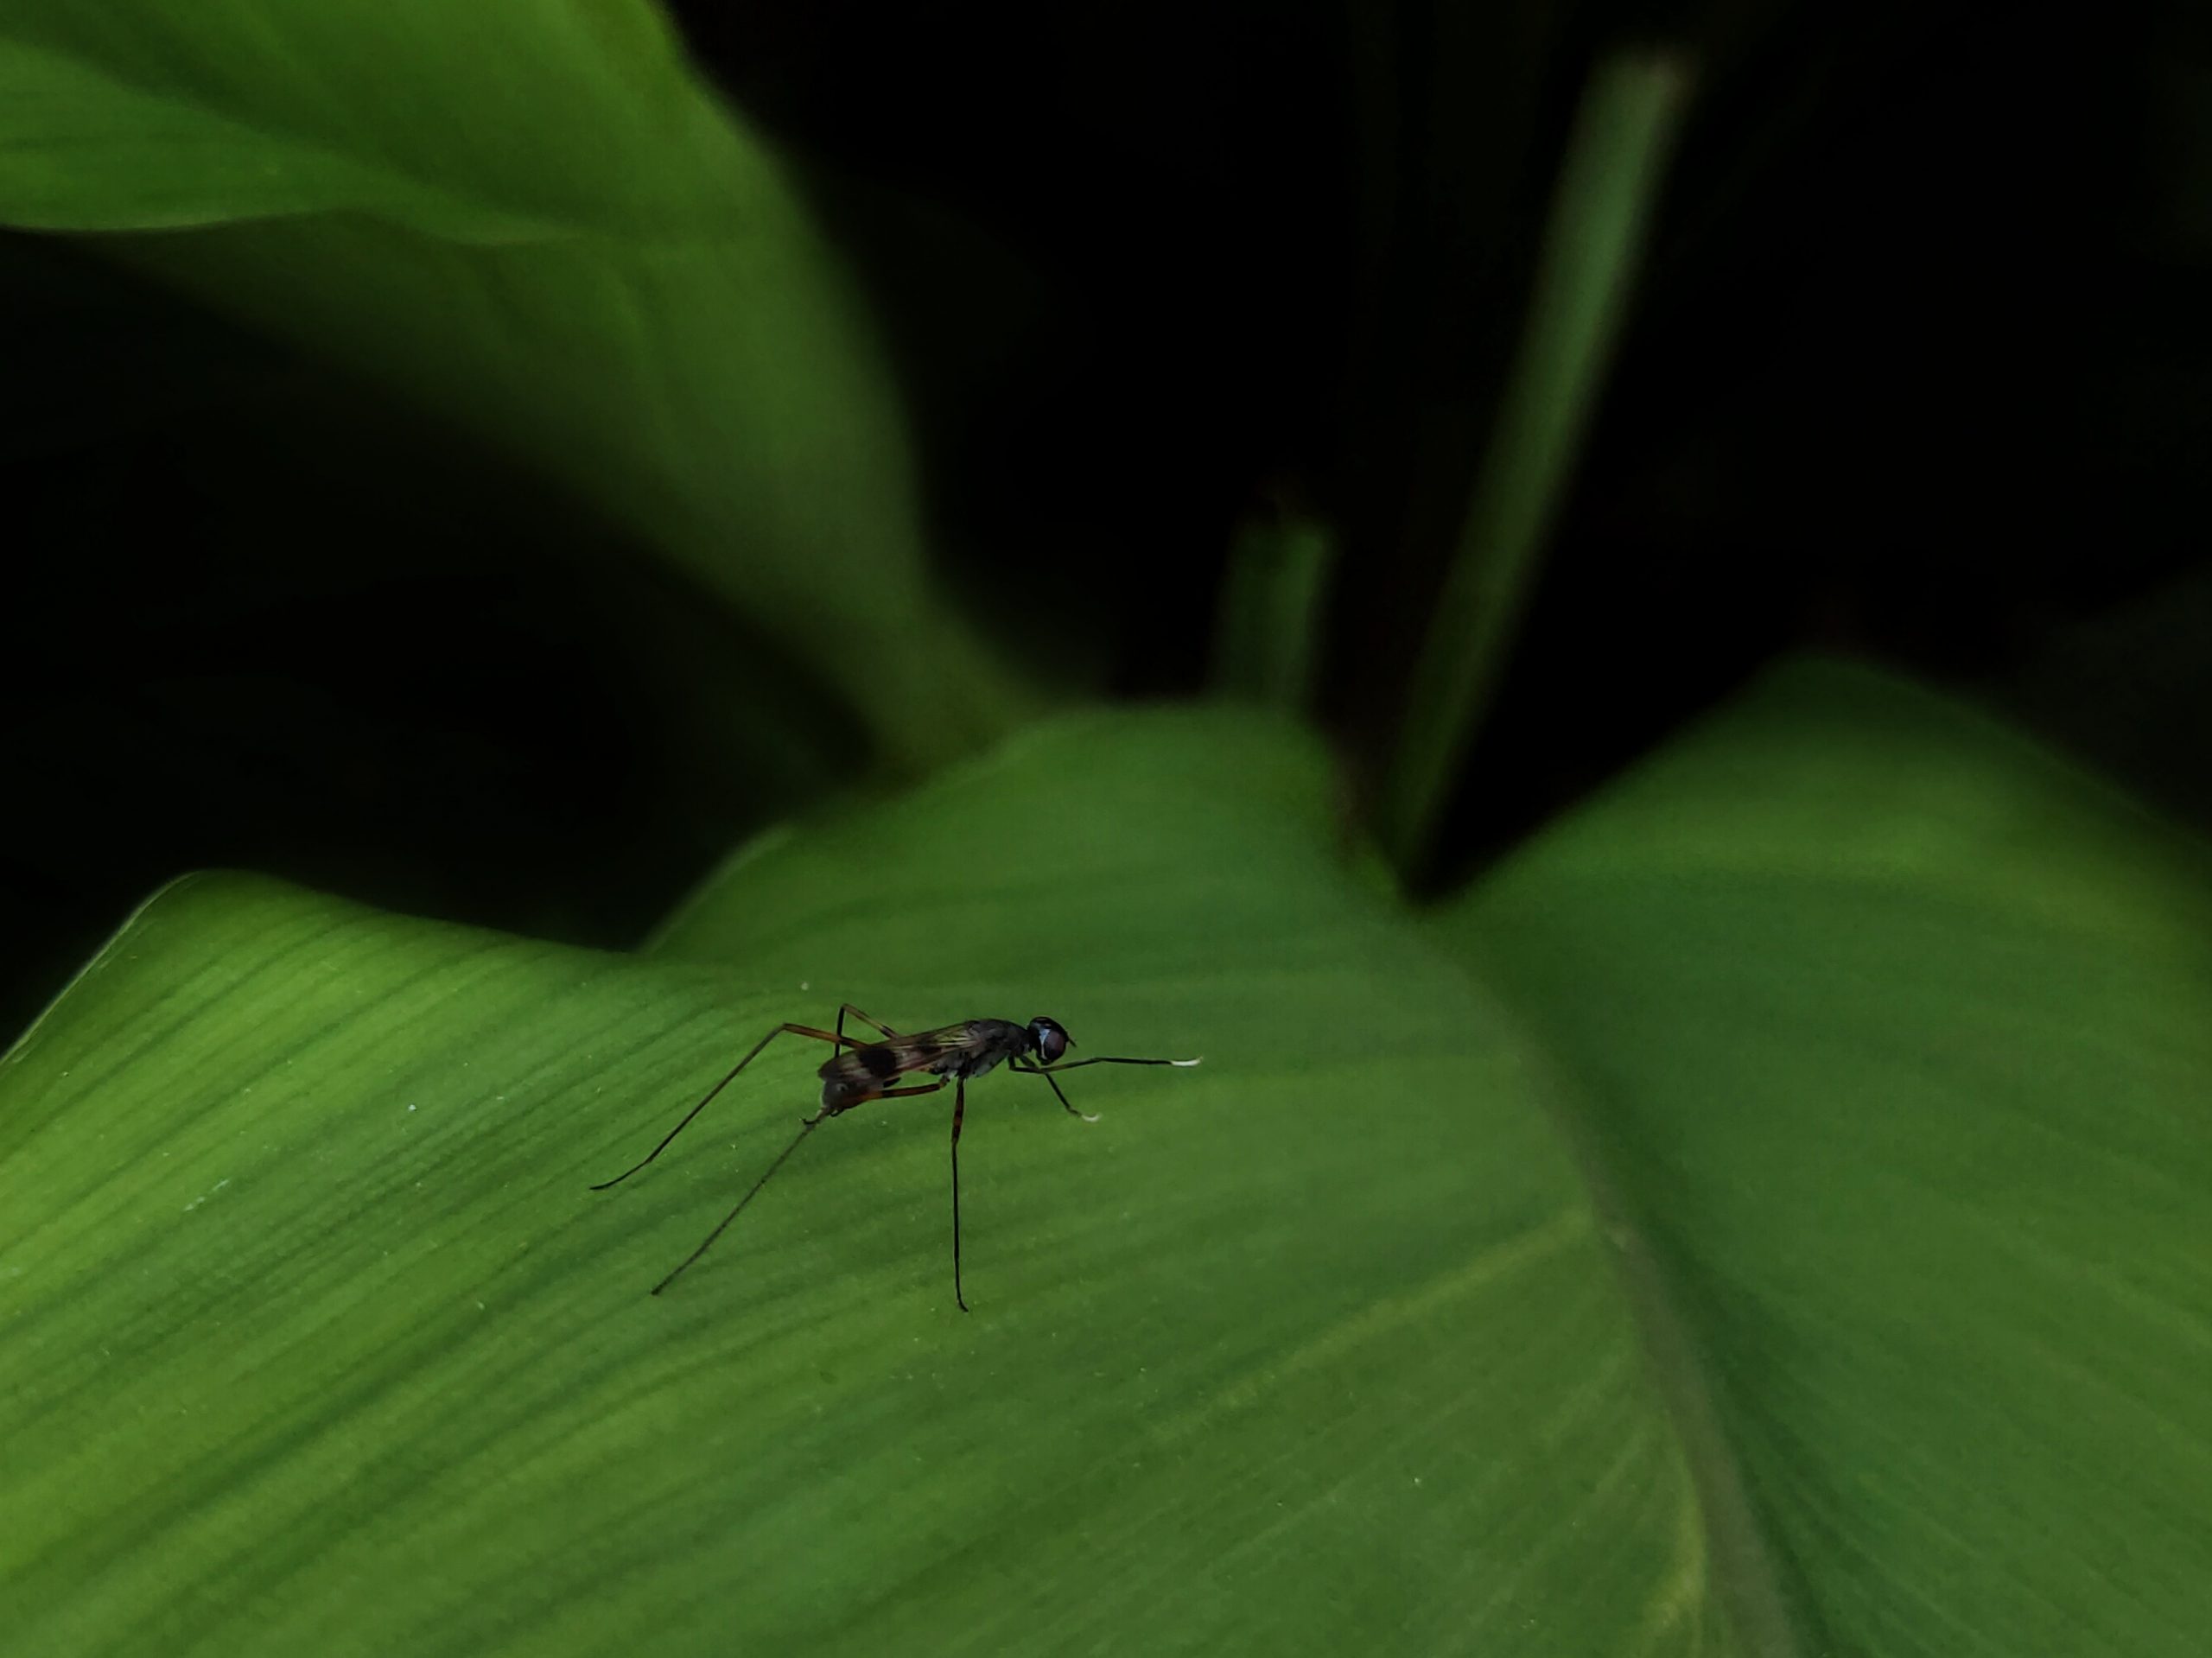 Mosquito on plant leaf